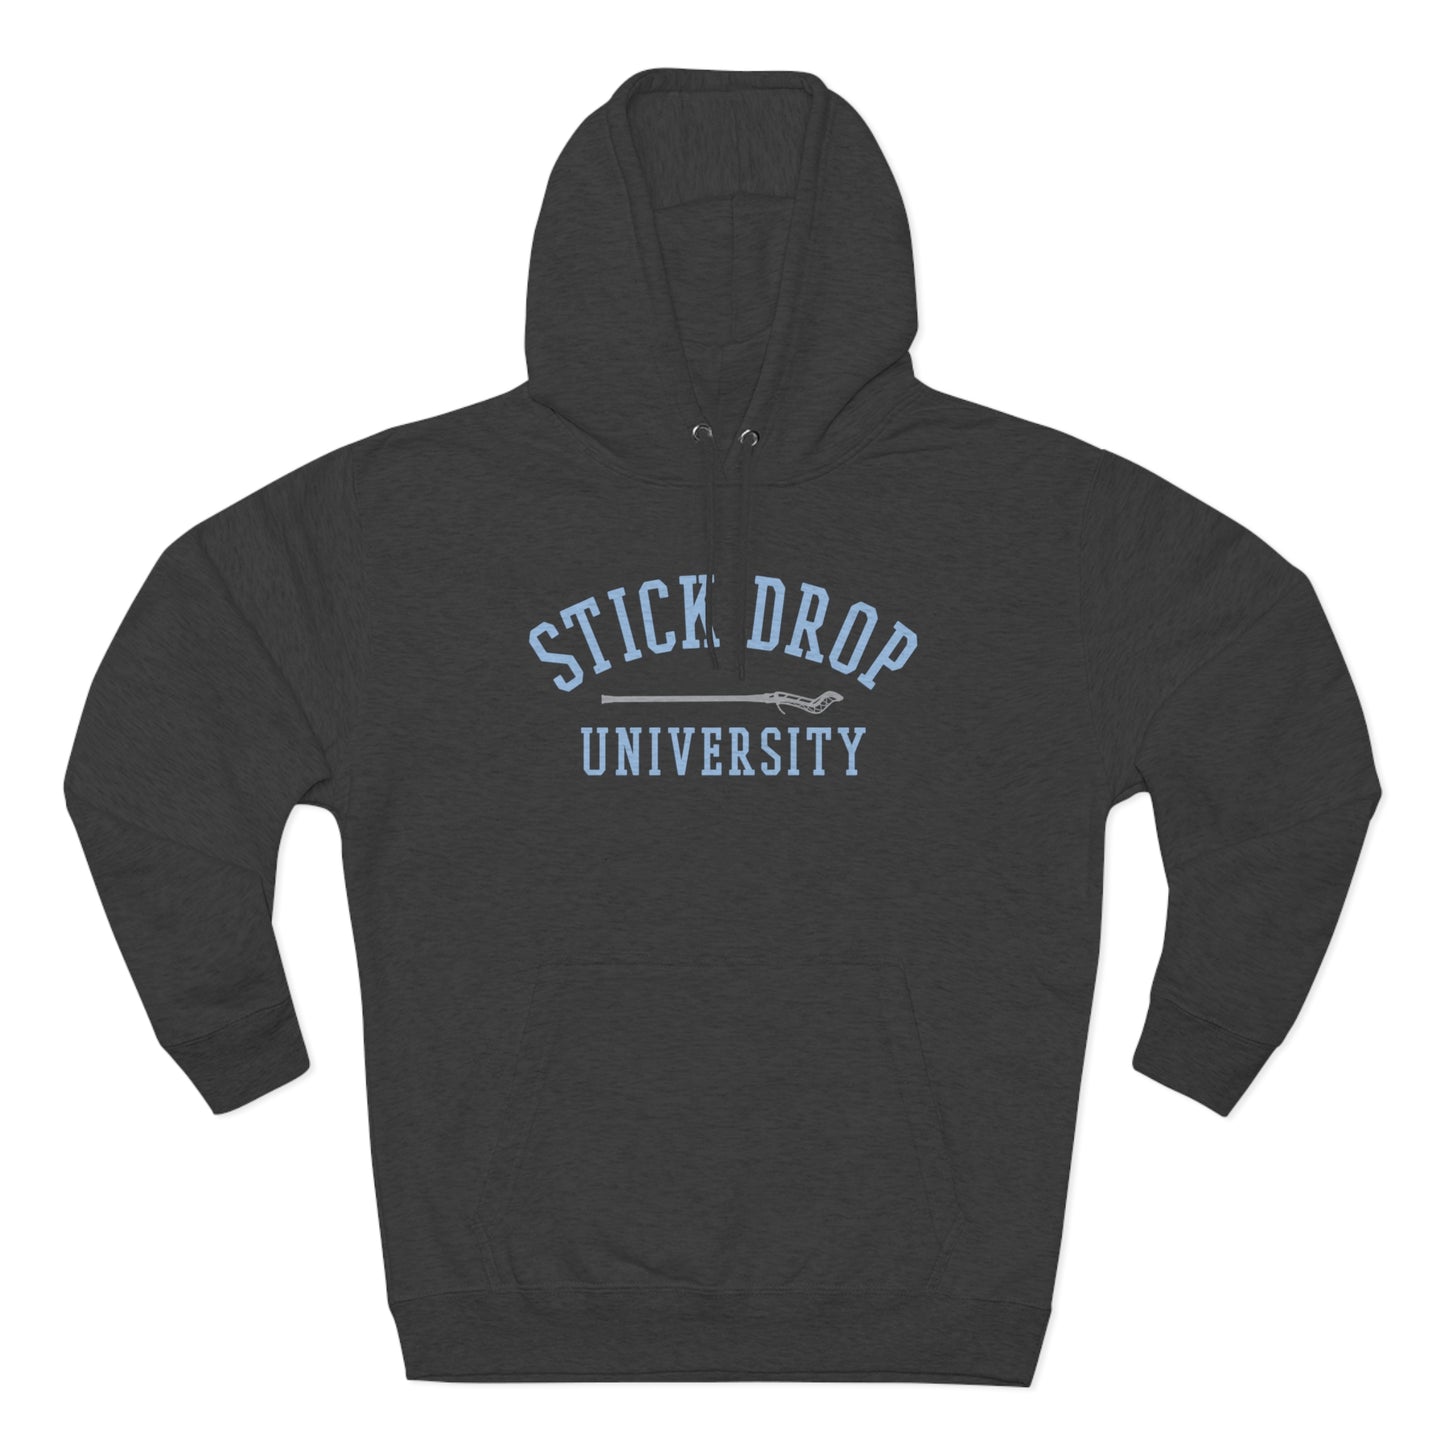 Charcoal Heather Stick Drop Lax Hoodie with light blue lettering